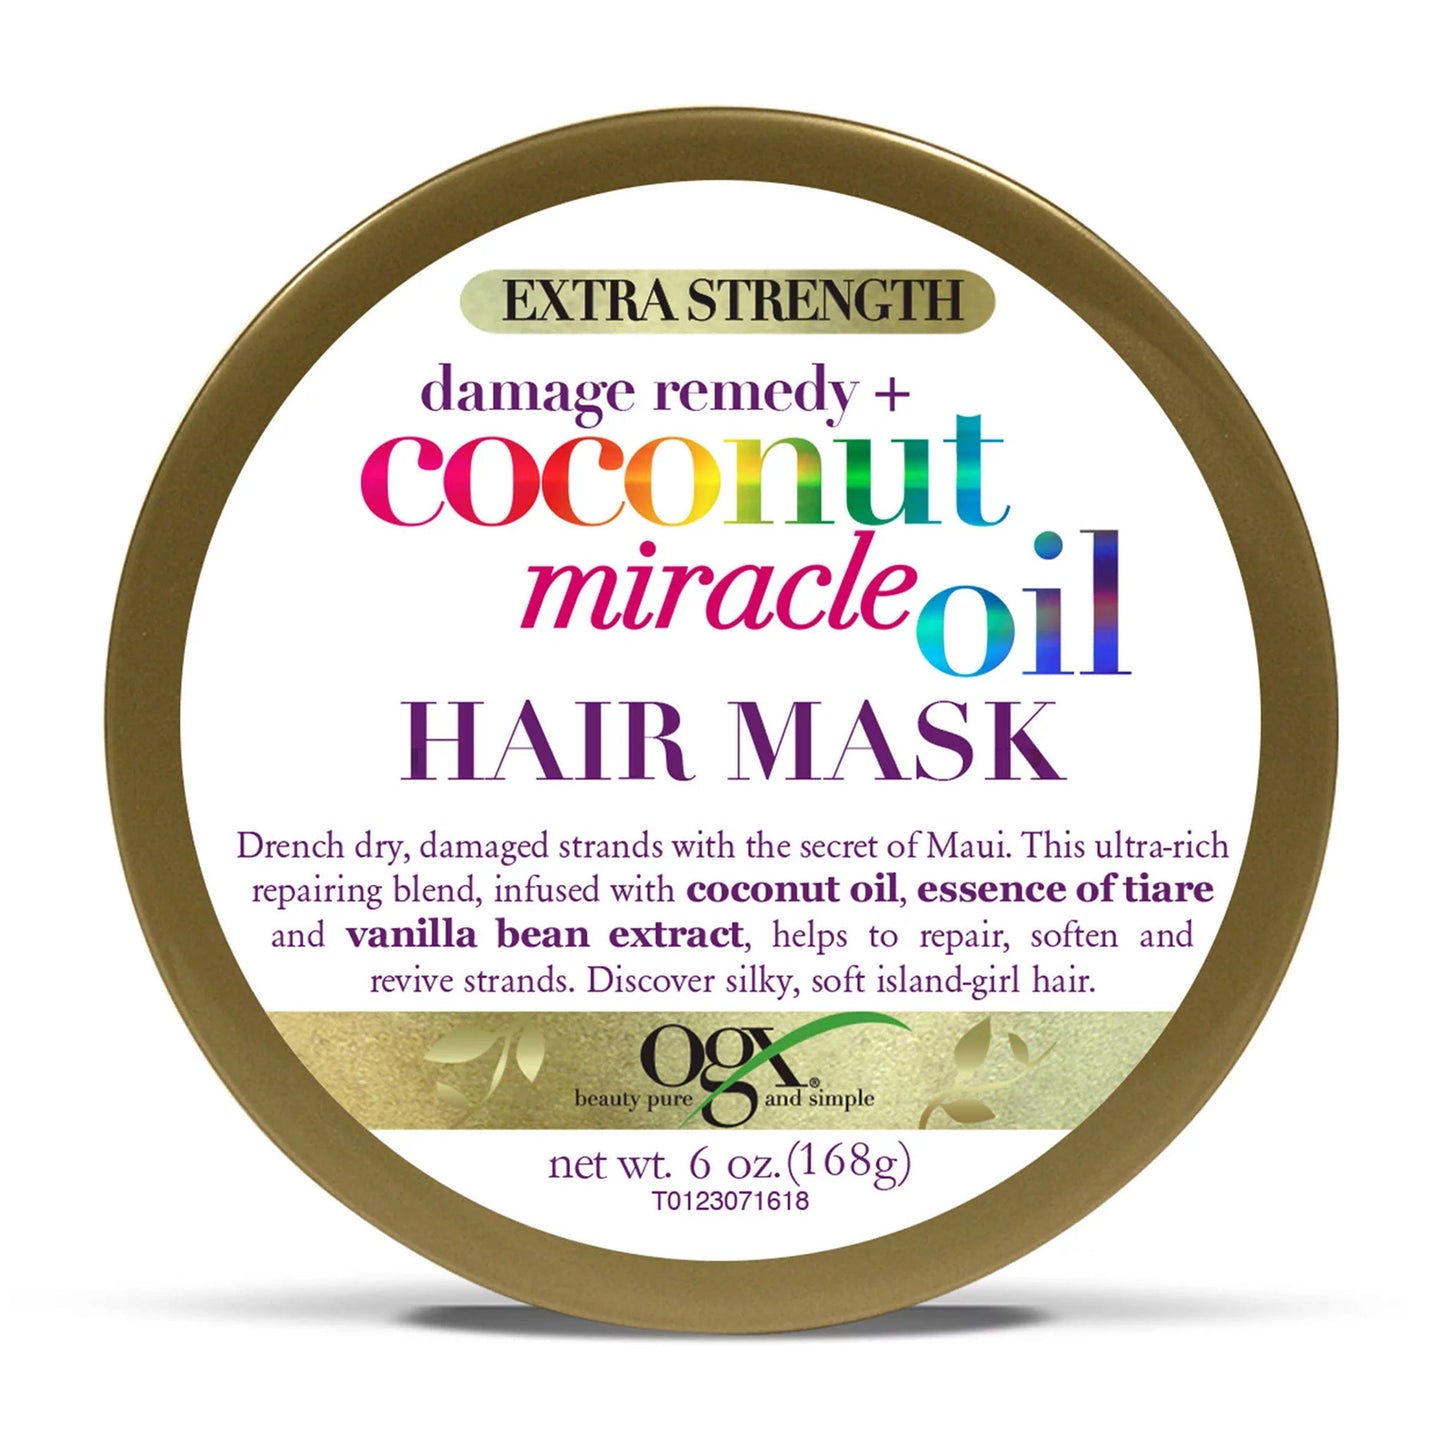 OGX - EXTRA STRENGTH DAMAGE REMEDY+ COCONUT MIRACLE OIL HAIR MASK - 168G